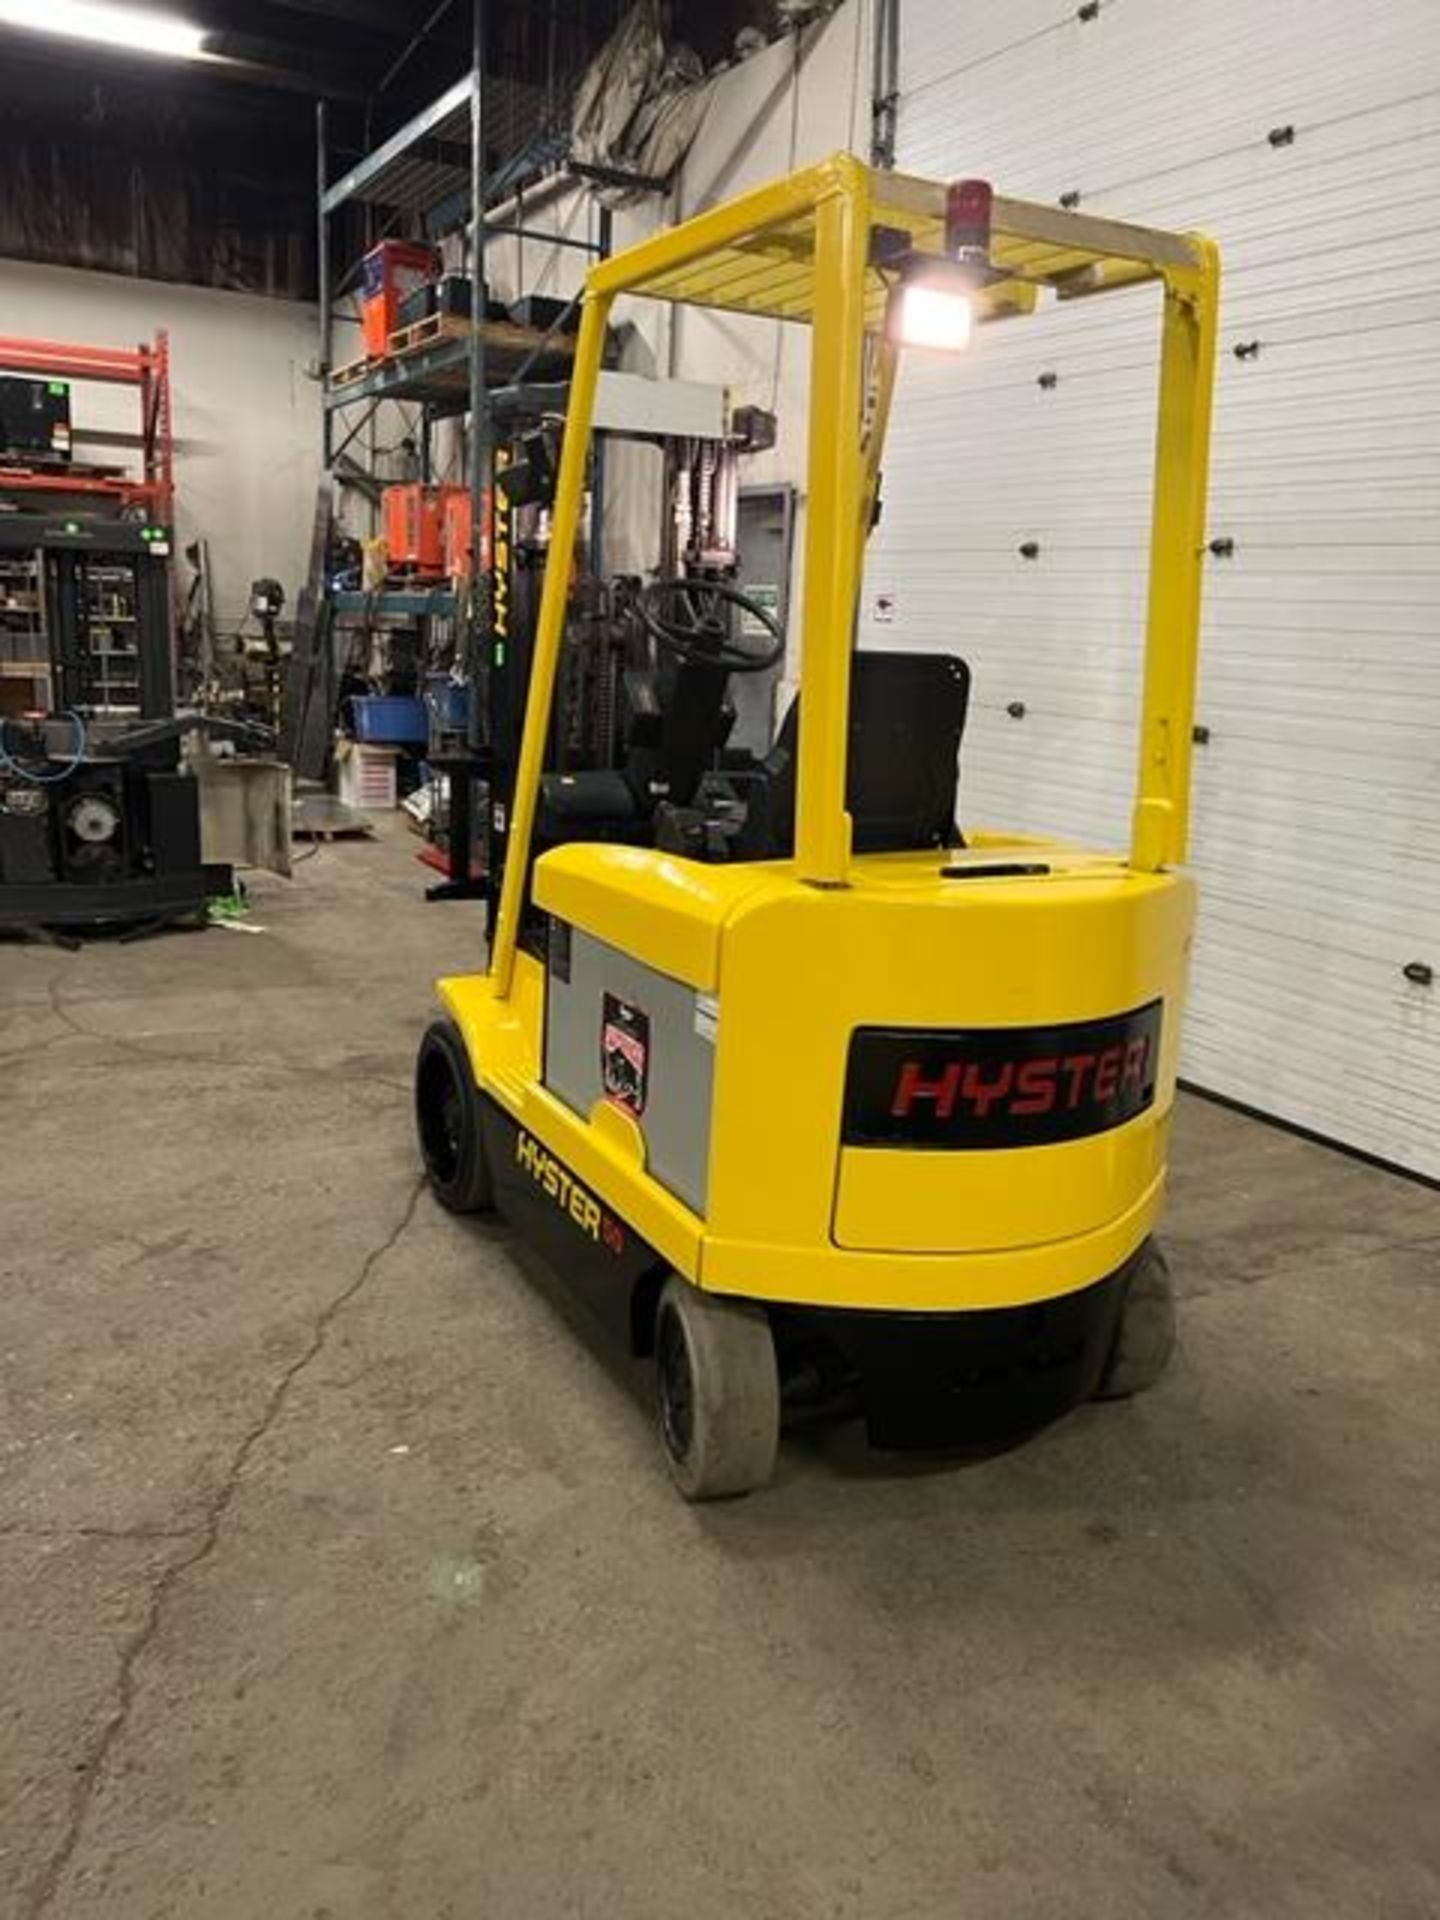 FREE CUSTOMS - MINT Hyster 5,000lbs Capacity Forklift Electric with 3-stage mast with SIDESHIFT - Image 3 of 3